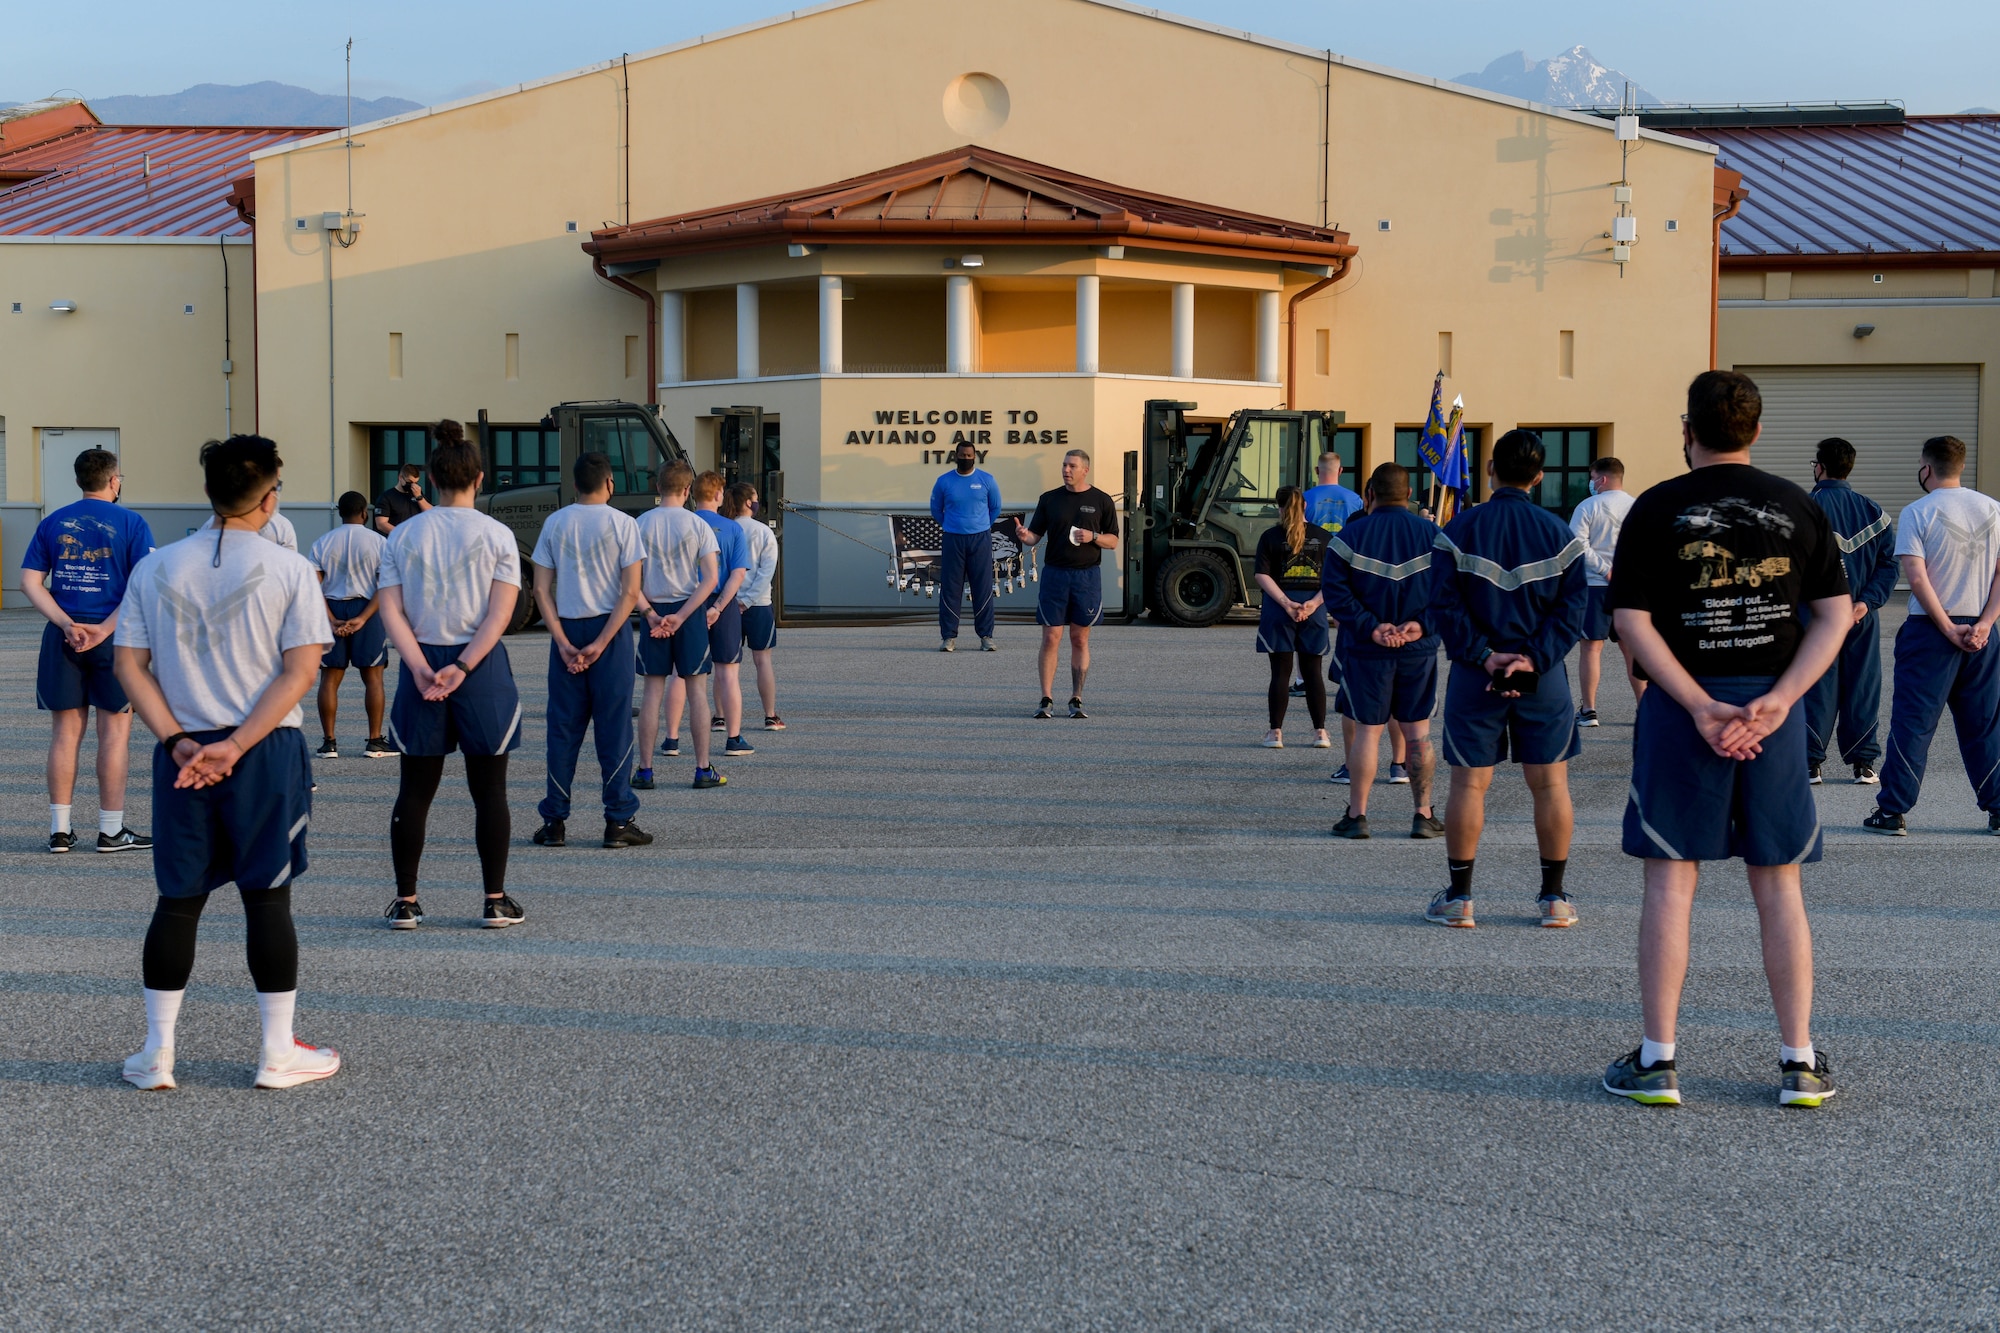 U.S. Air Force Senior Master Sgt. Timothy Okkerse, 724th Aircraft Maintenance Squadron superintendent, center, gives opening remarks before a ‘Port Dawg’ memorial run at Aviano Air Base, Italy, May 27, 2021. The ‘Port Dawg’ memorial run is an annual event which honors 12 fallen teammates from the career field with a 2.5 mile run. Port Dawgs are transportation specialists serving at aerial ports around the world. (U.S. Air Force photo by Airman 1st Class Brooke Moeder)